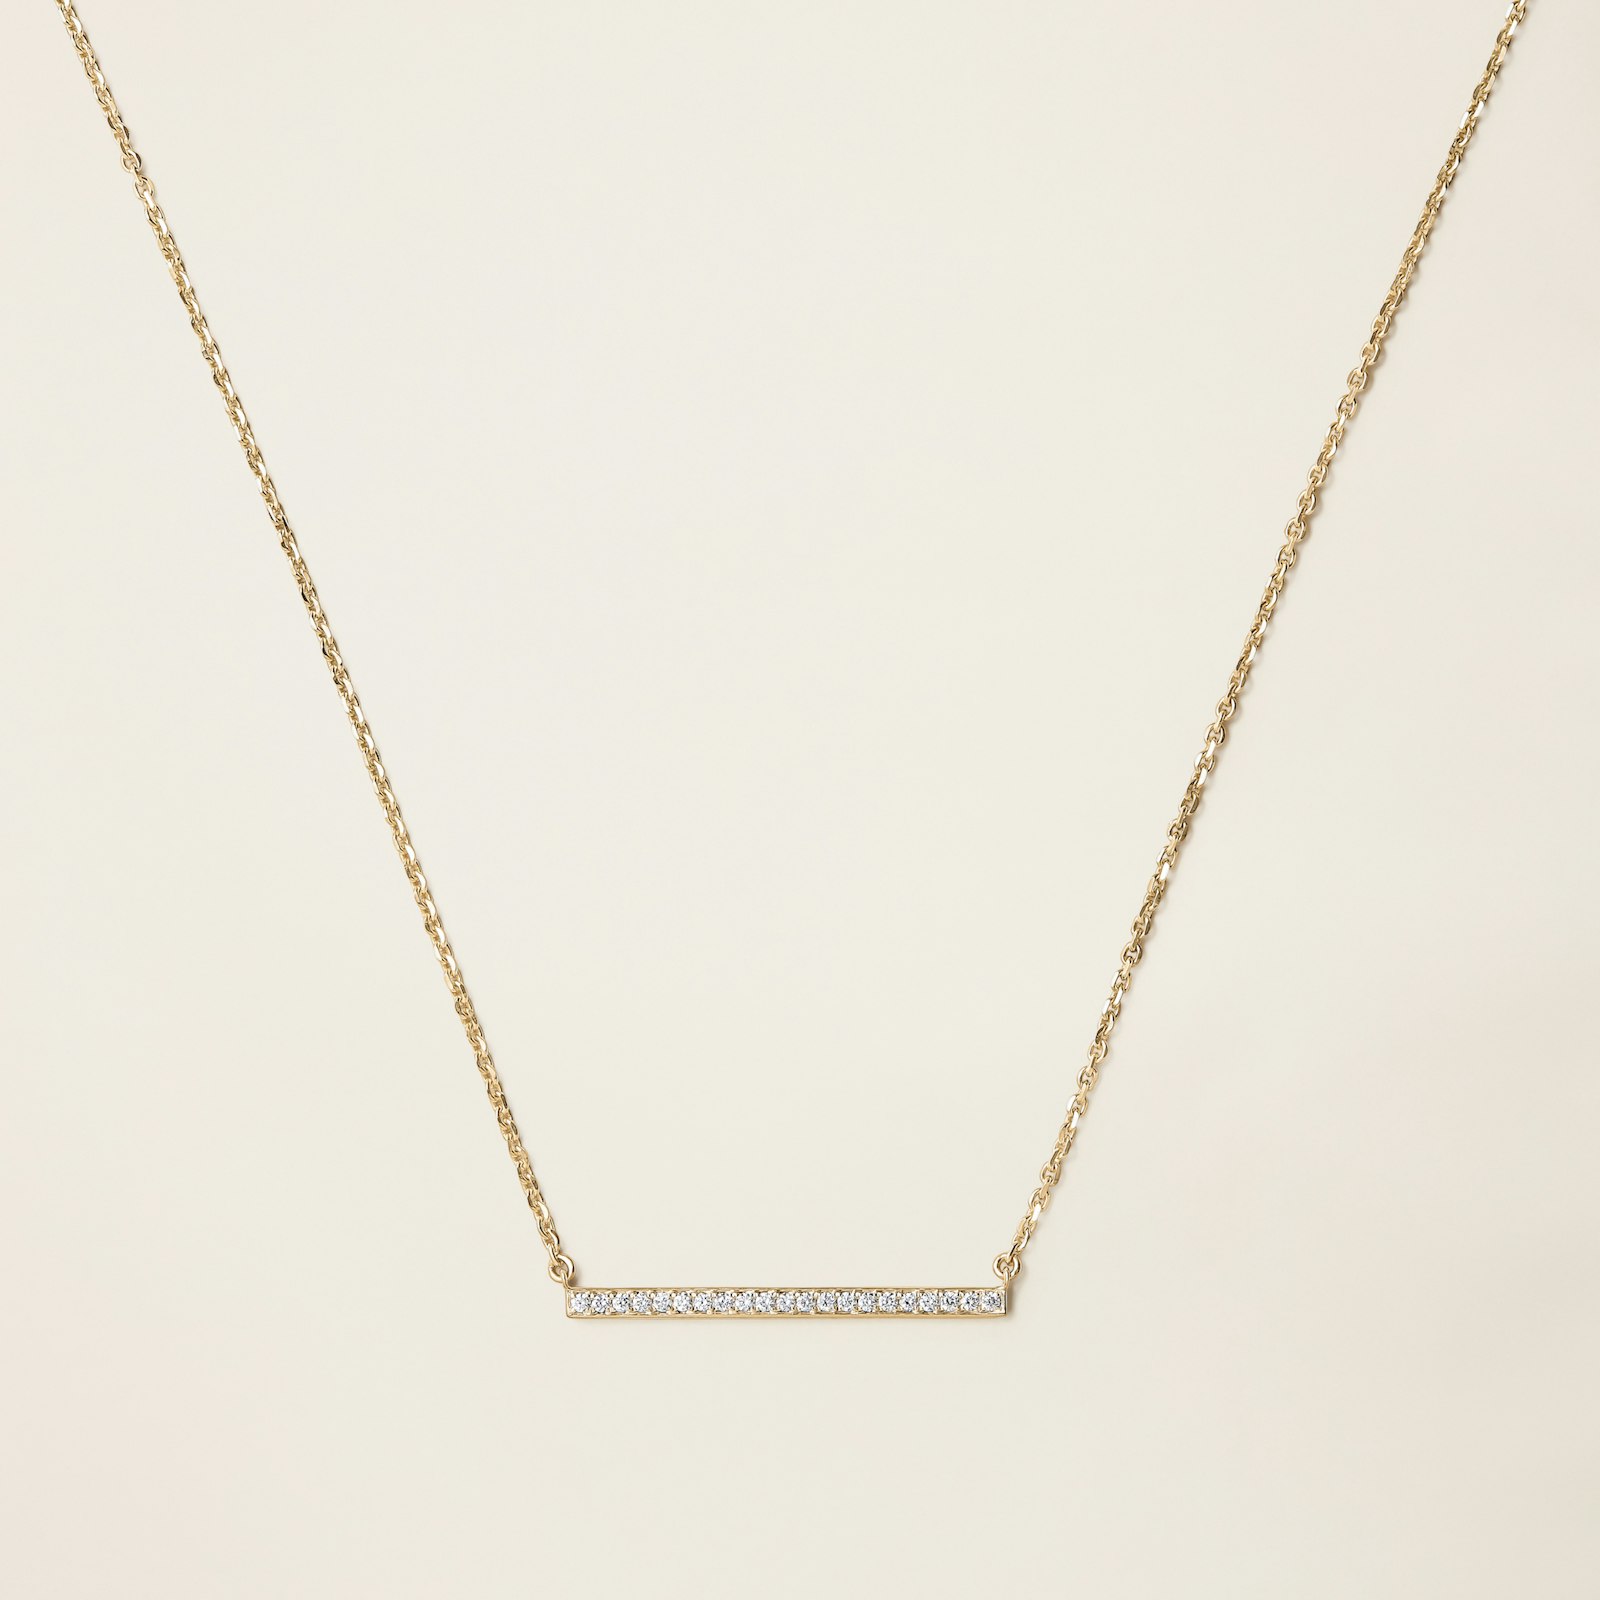 14k Solid Gold Diamond Pavé Bar Necklace (remake of existing style with new merchant)_A_0193.jpg